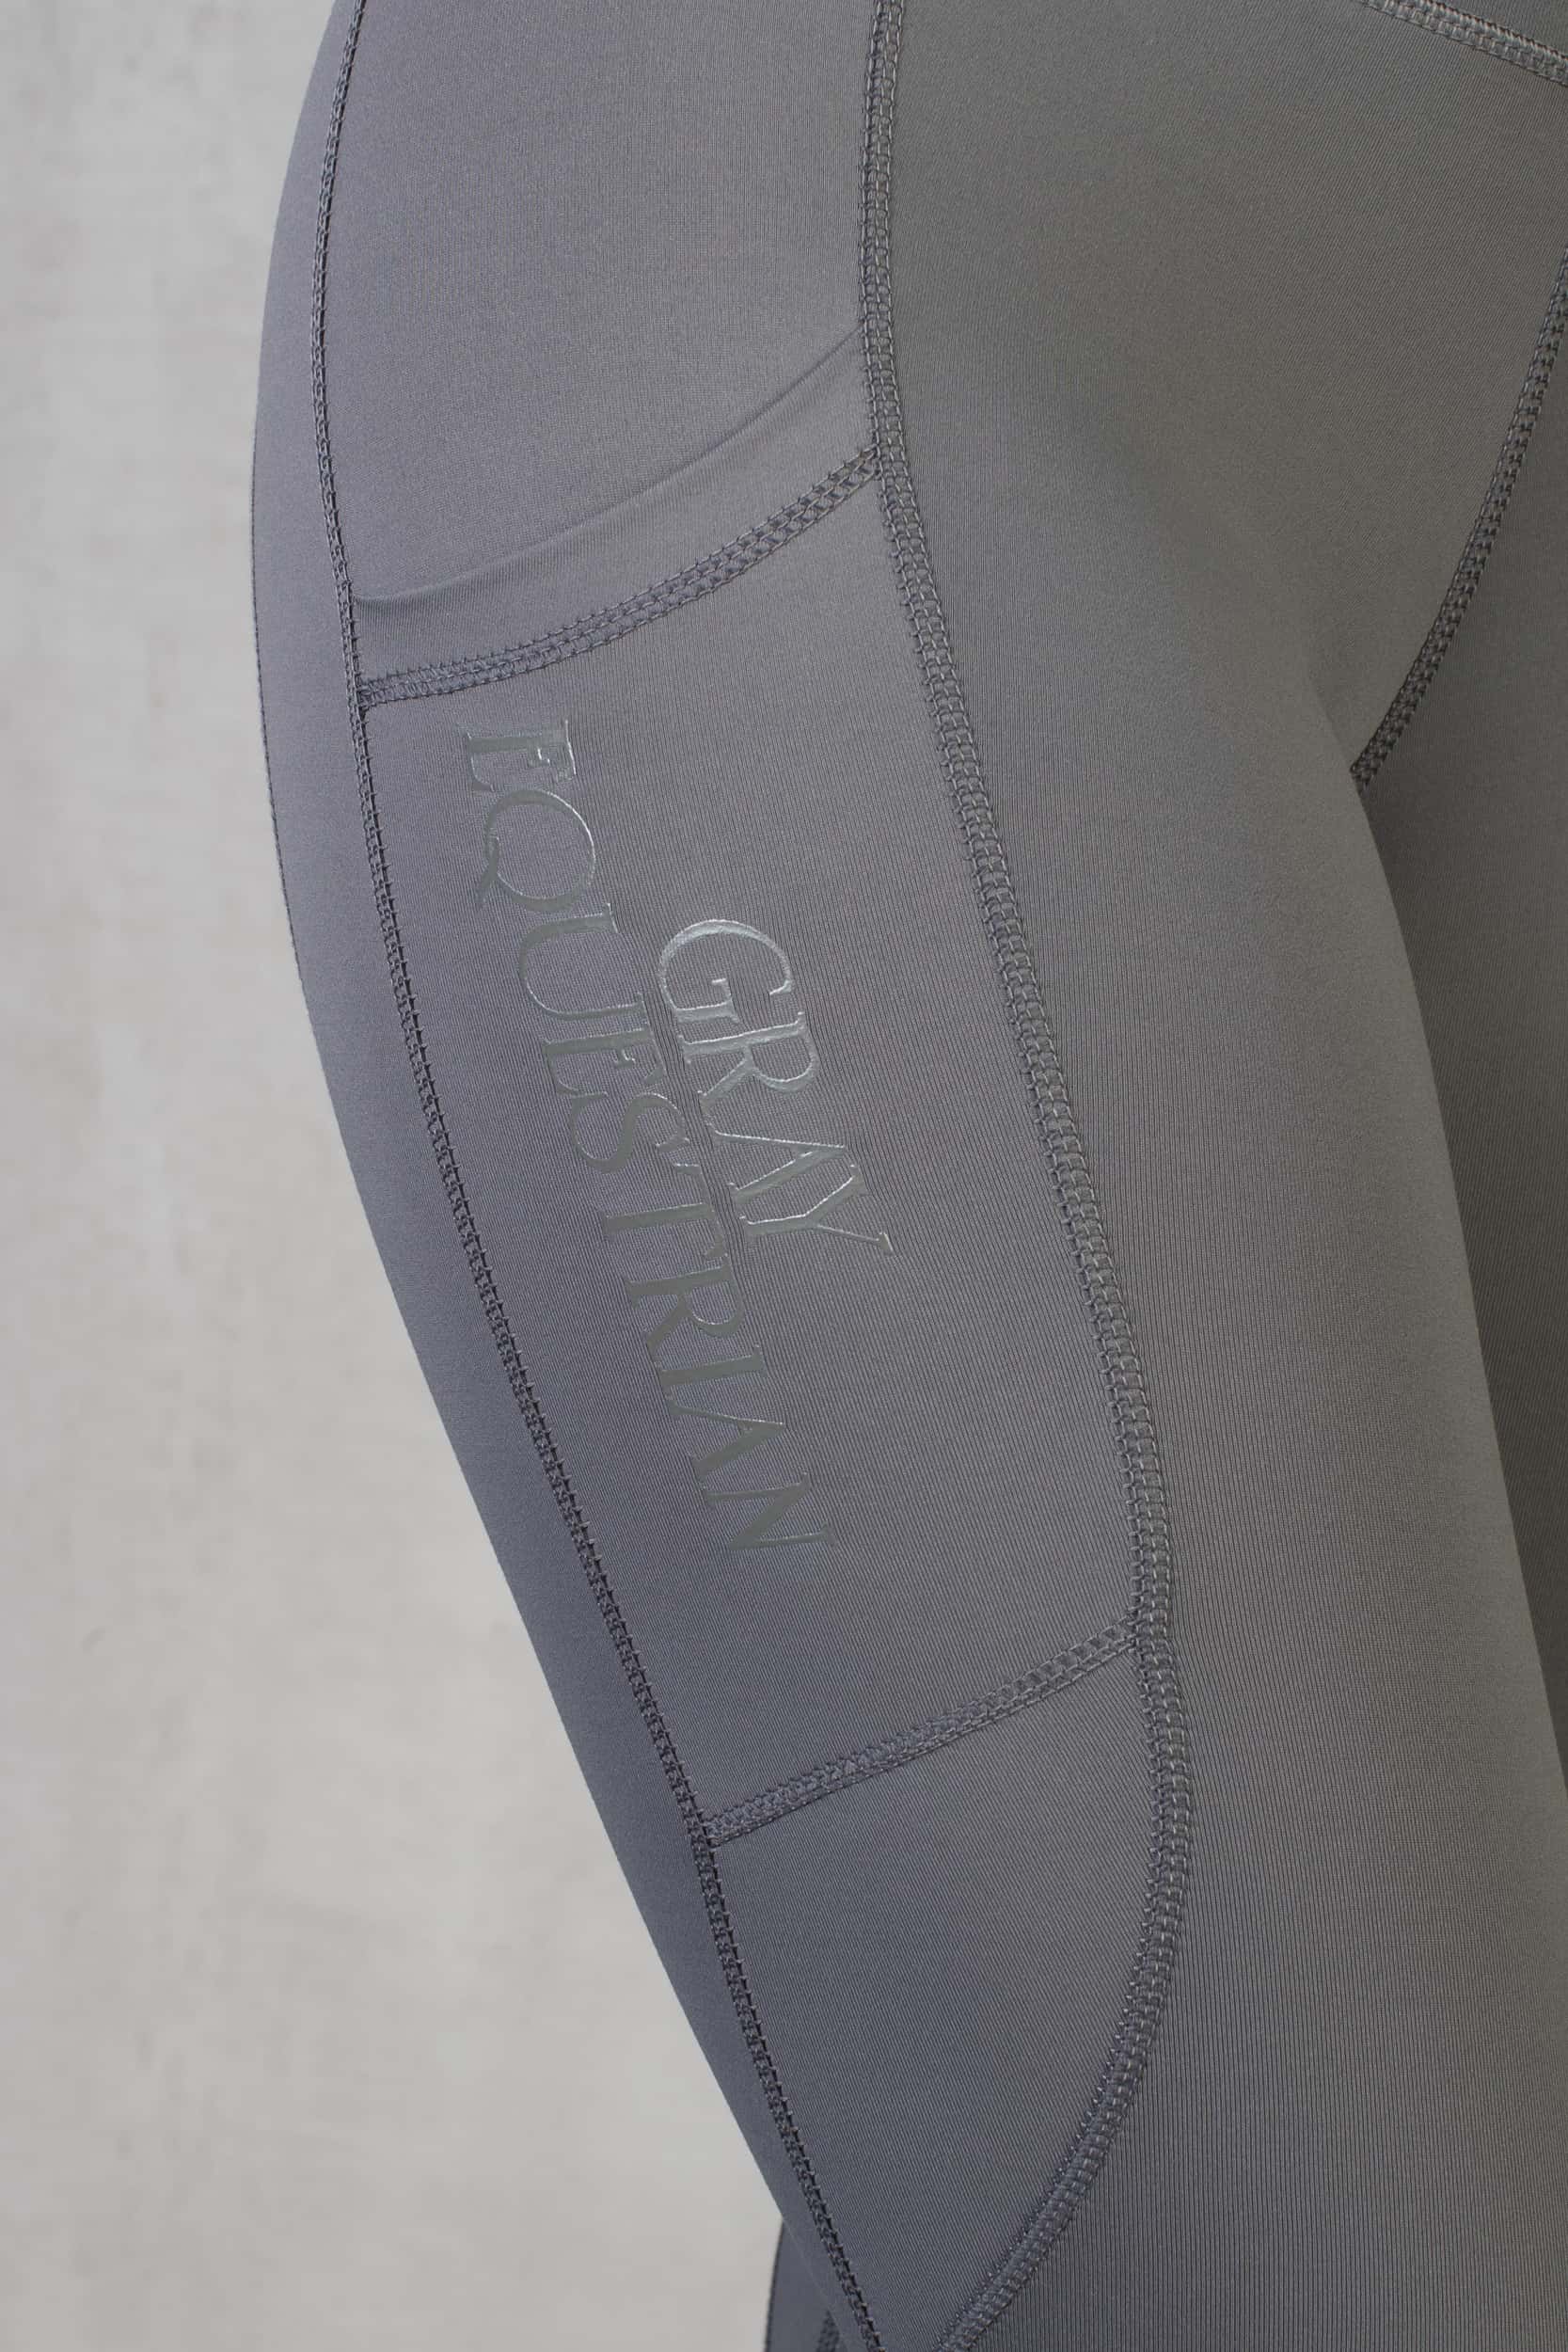 A view of the phone pocket on the side of our grey leggings.